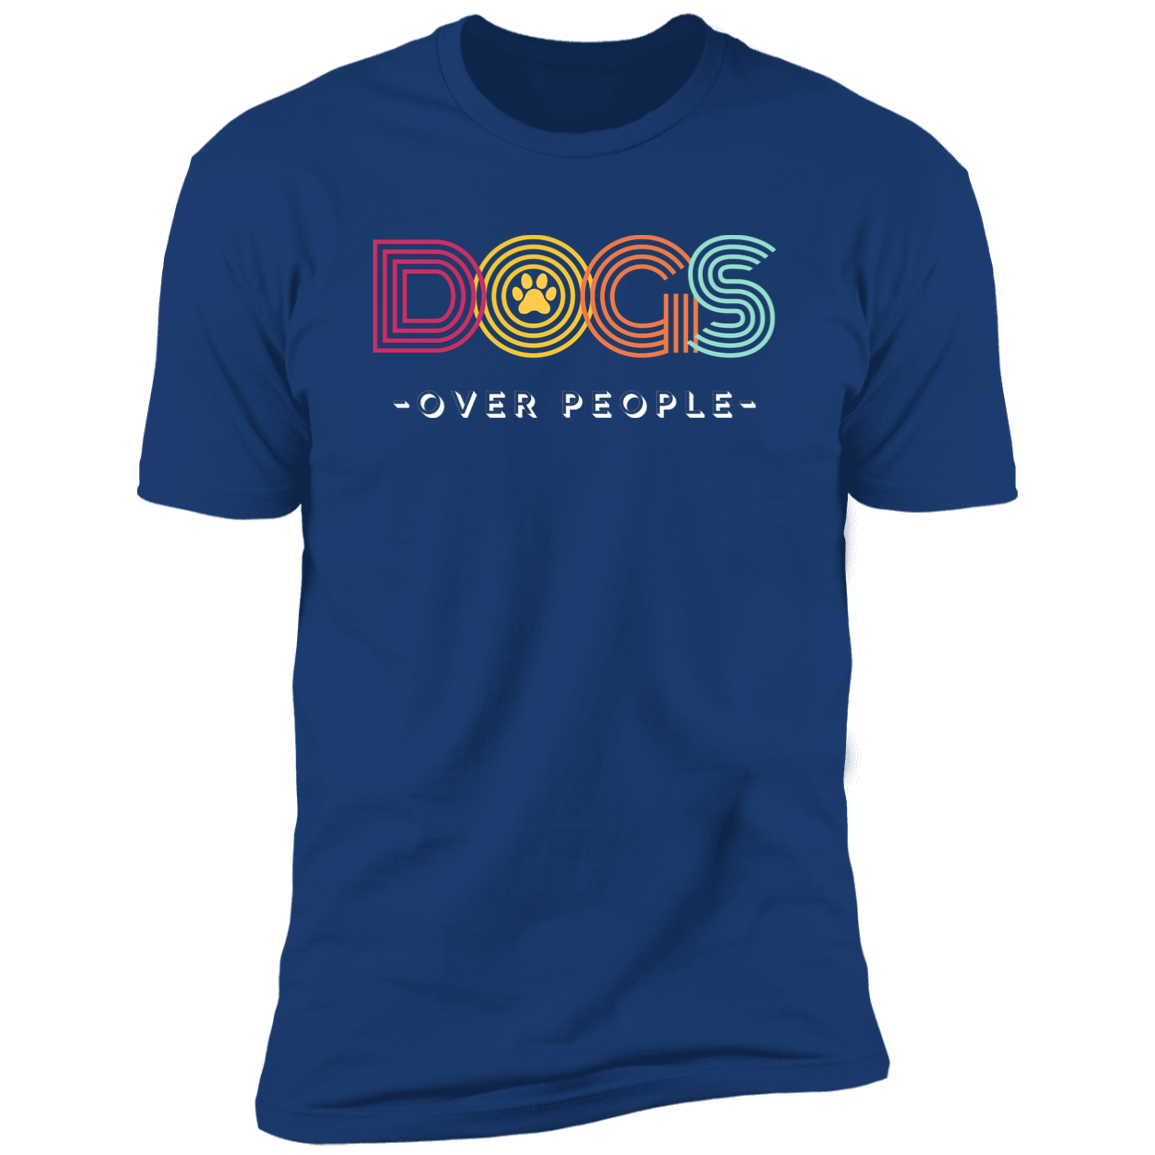 Dogs Over People t-shirt, funny dog shirt for humans, in royal blue